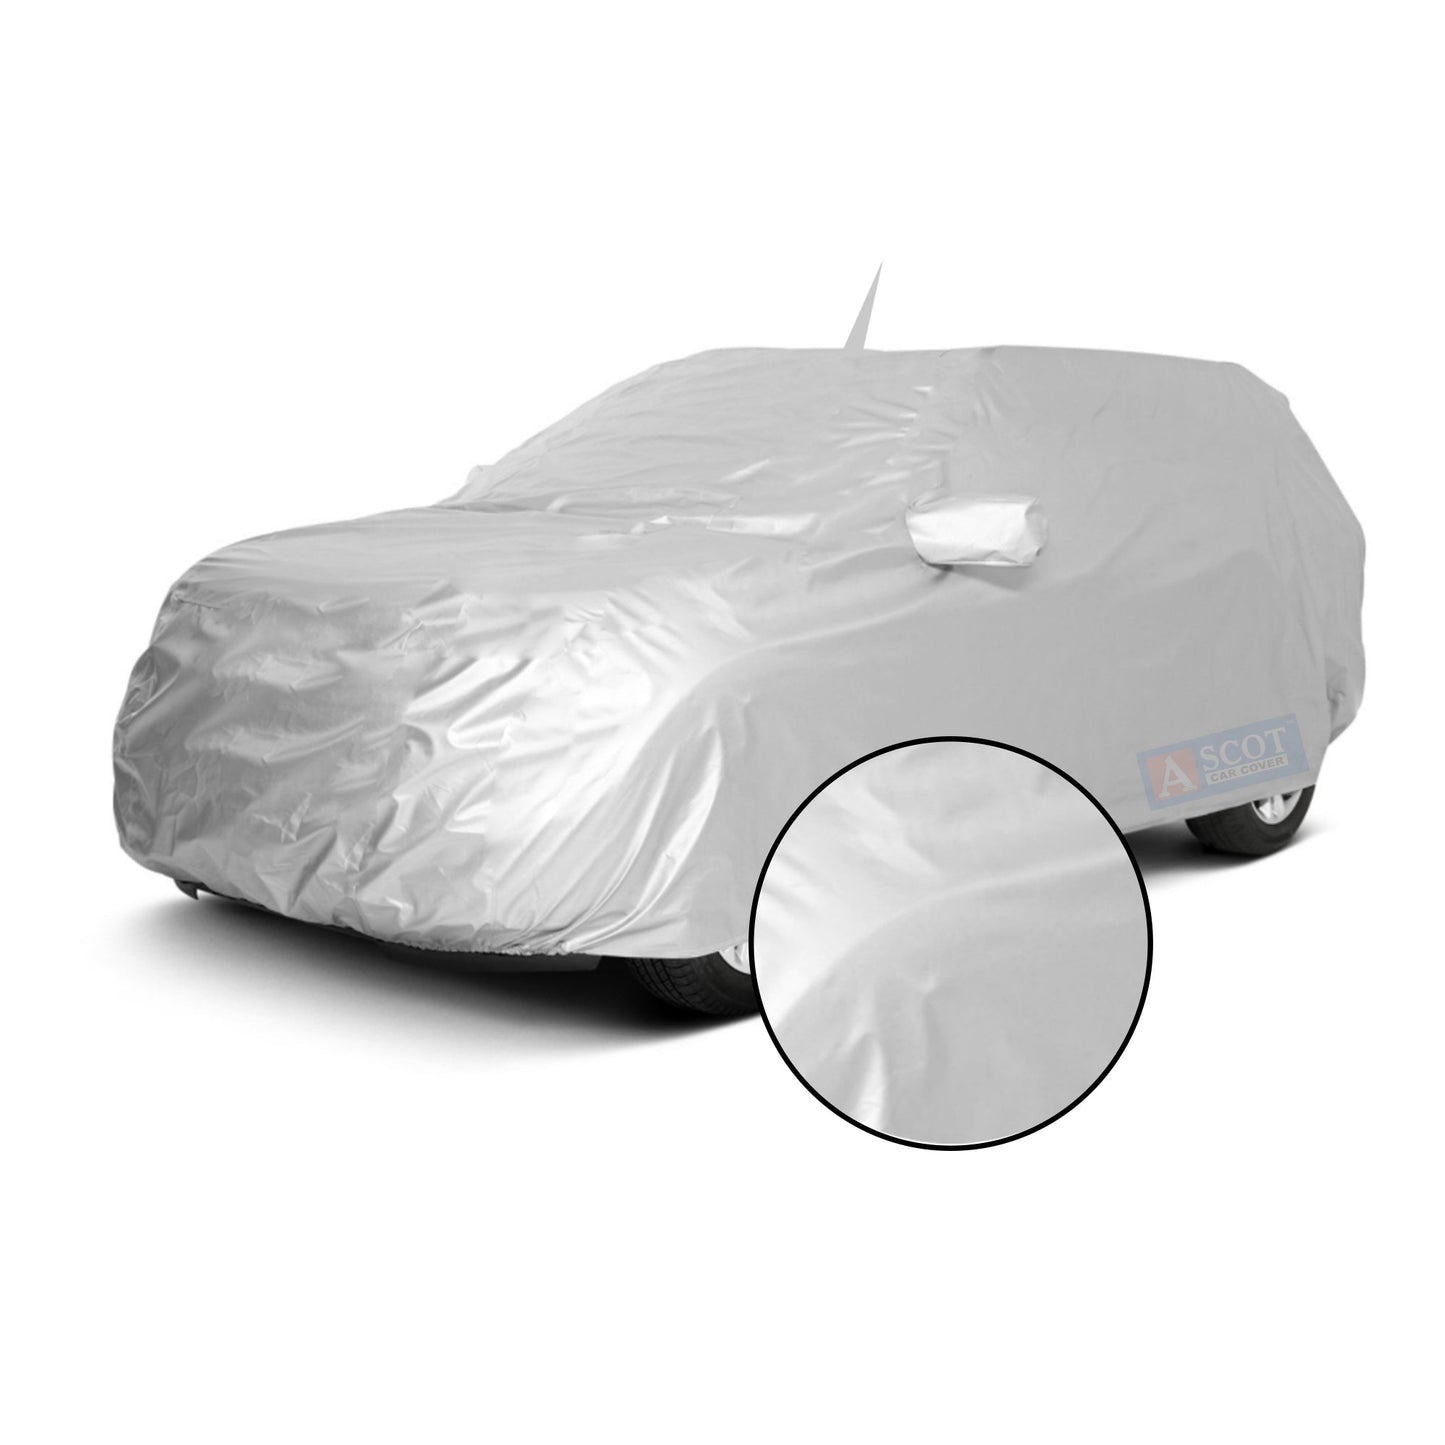 Ascot Renault Kwid Car Body Cover Dust Proof, Trippel Stitched